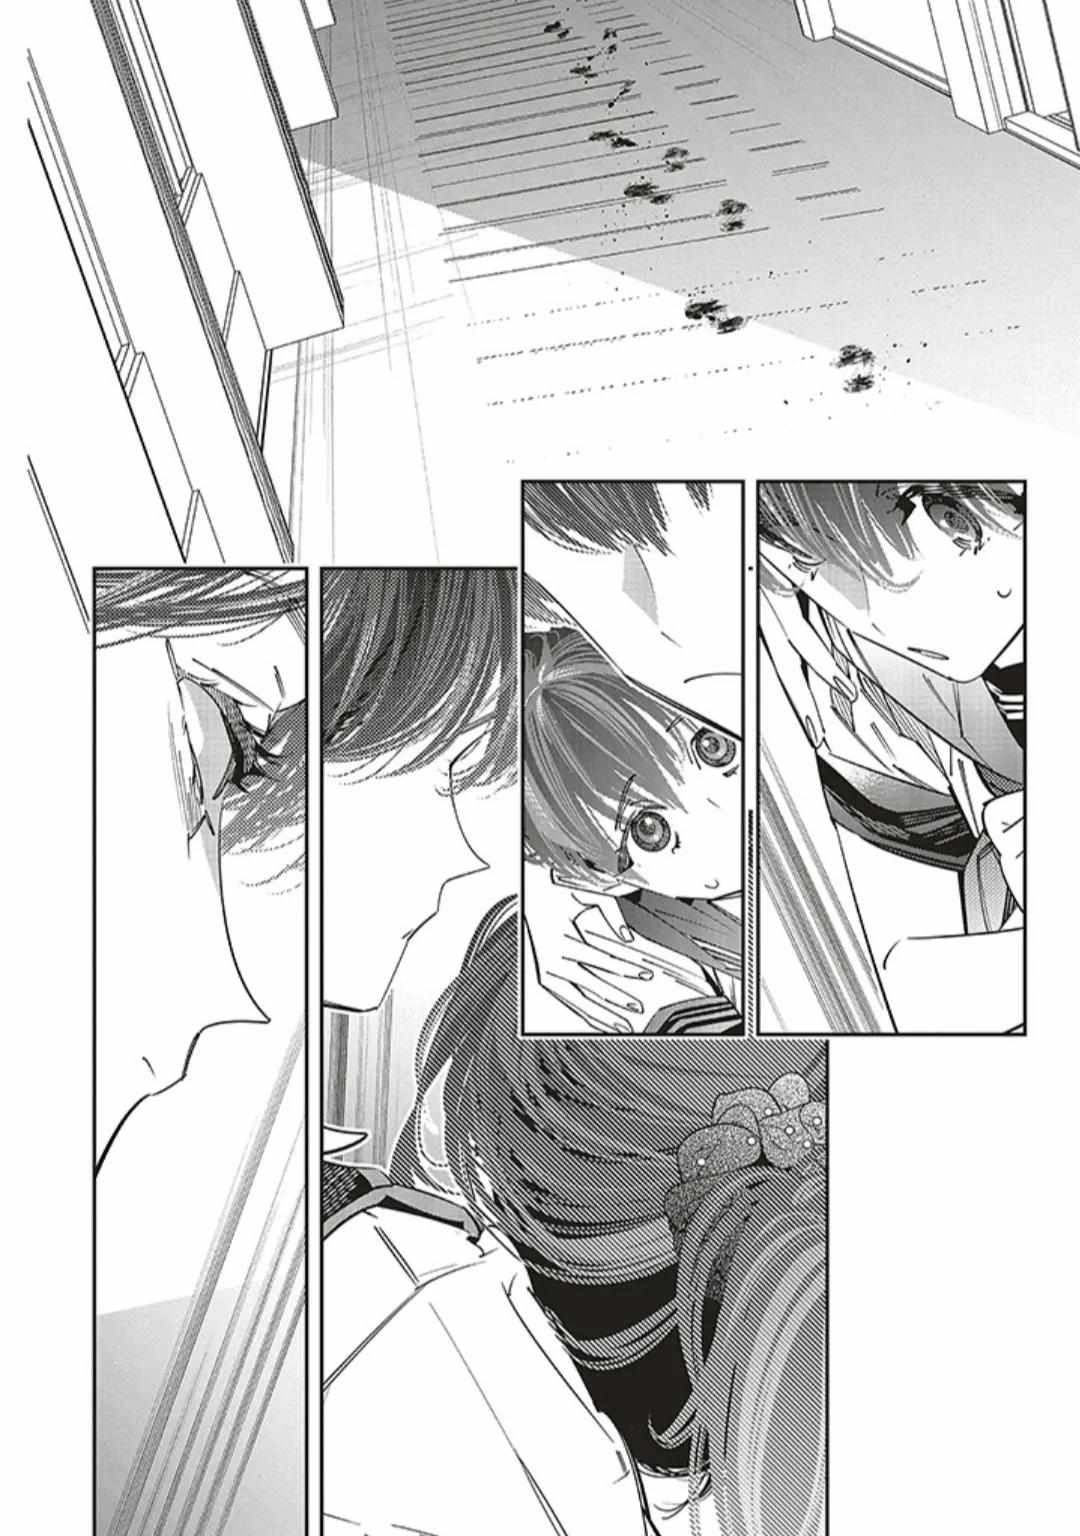 I Reincarnated as the Little Sister of a Death Game's Murder Mastermind and Failed - chapter 18 - #4